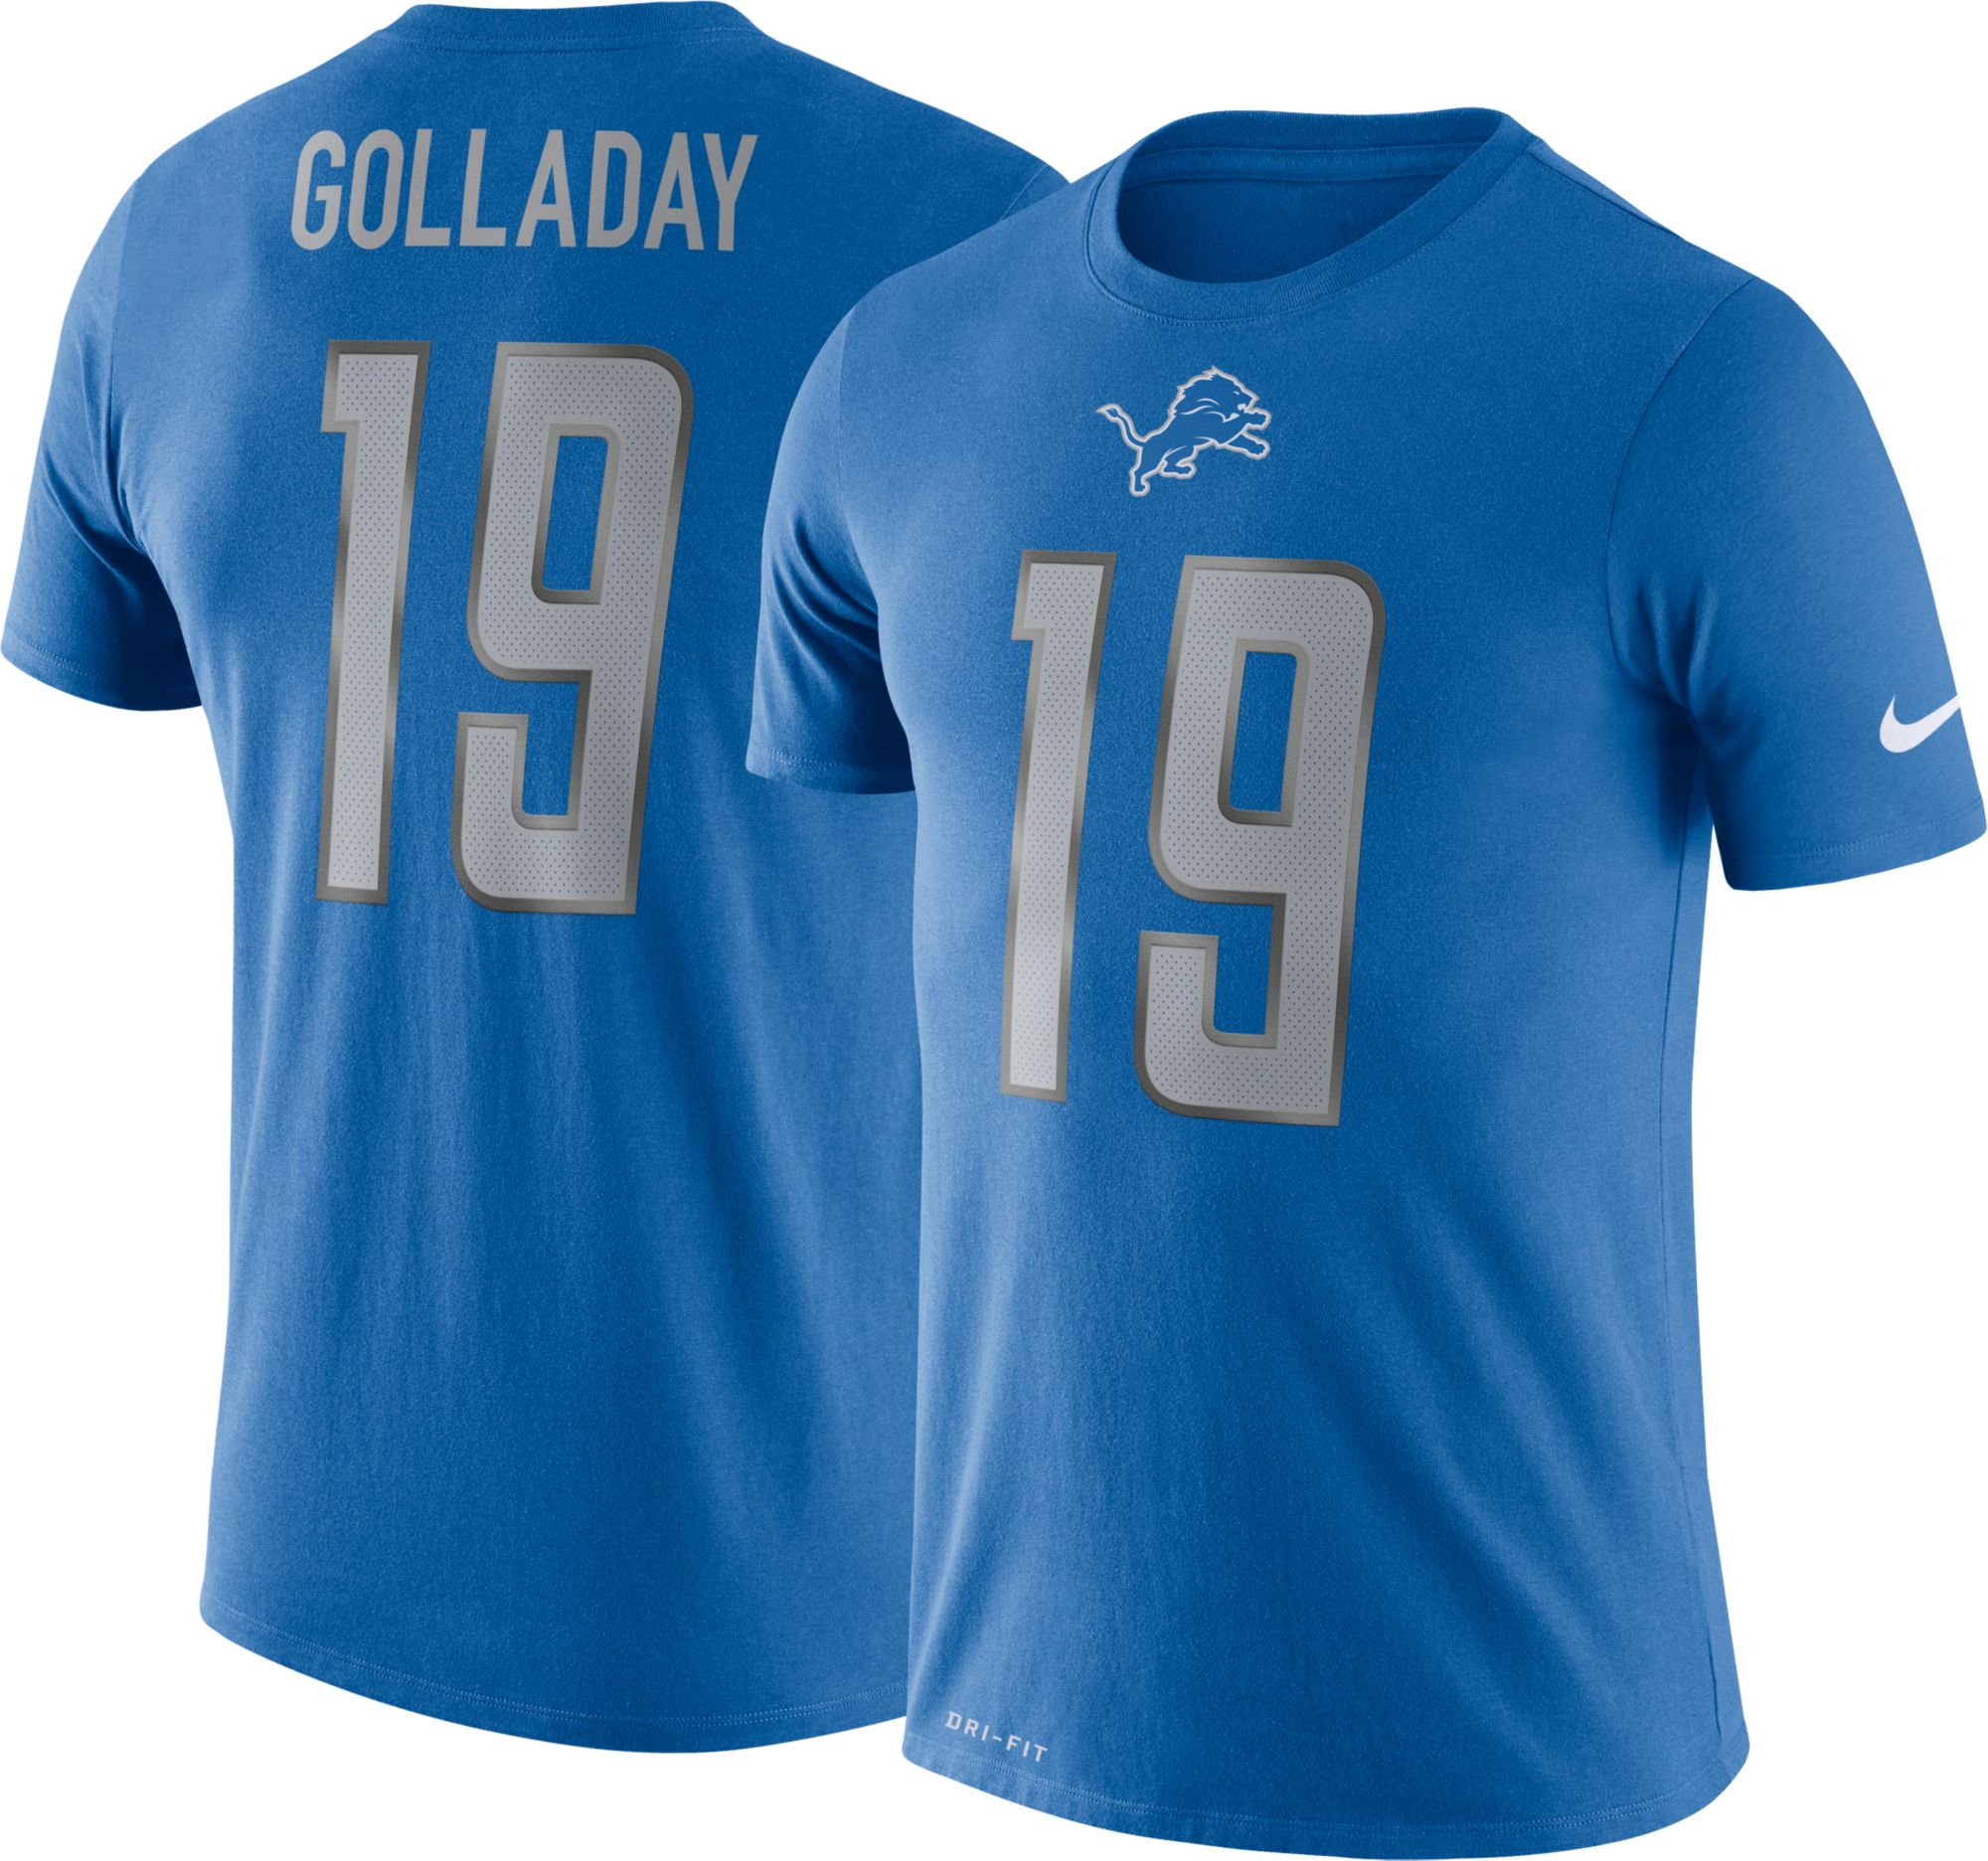 kenny golladay jersey